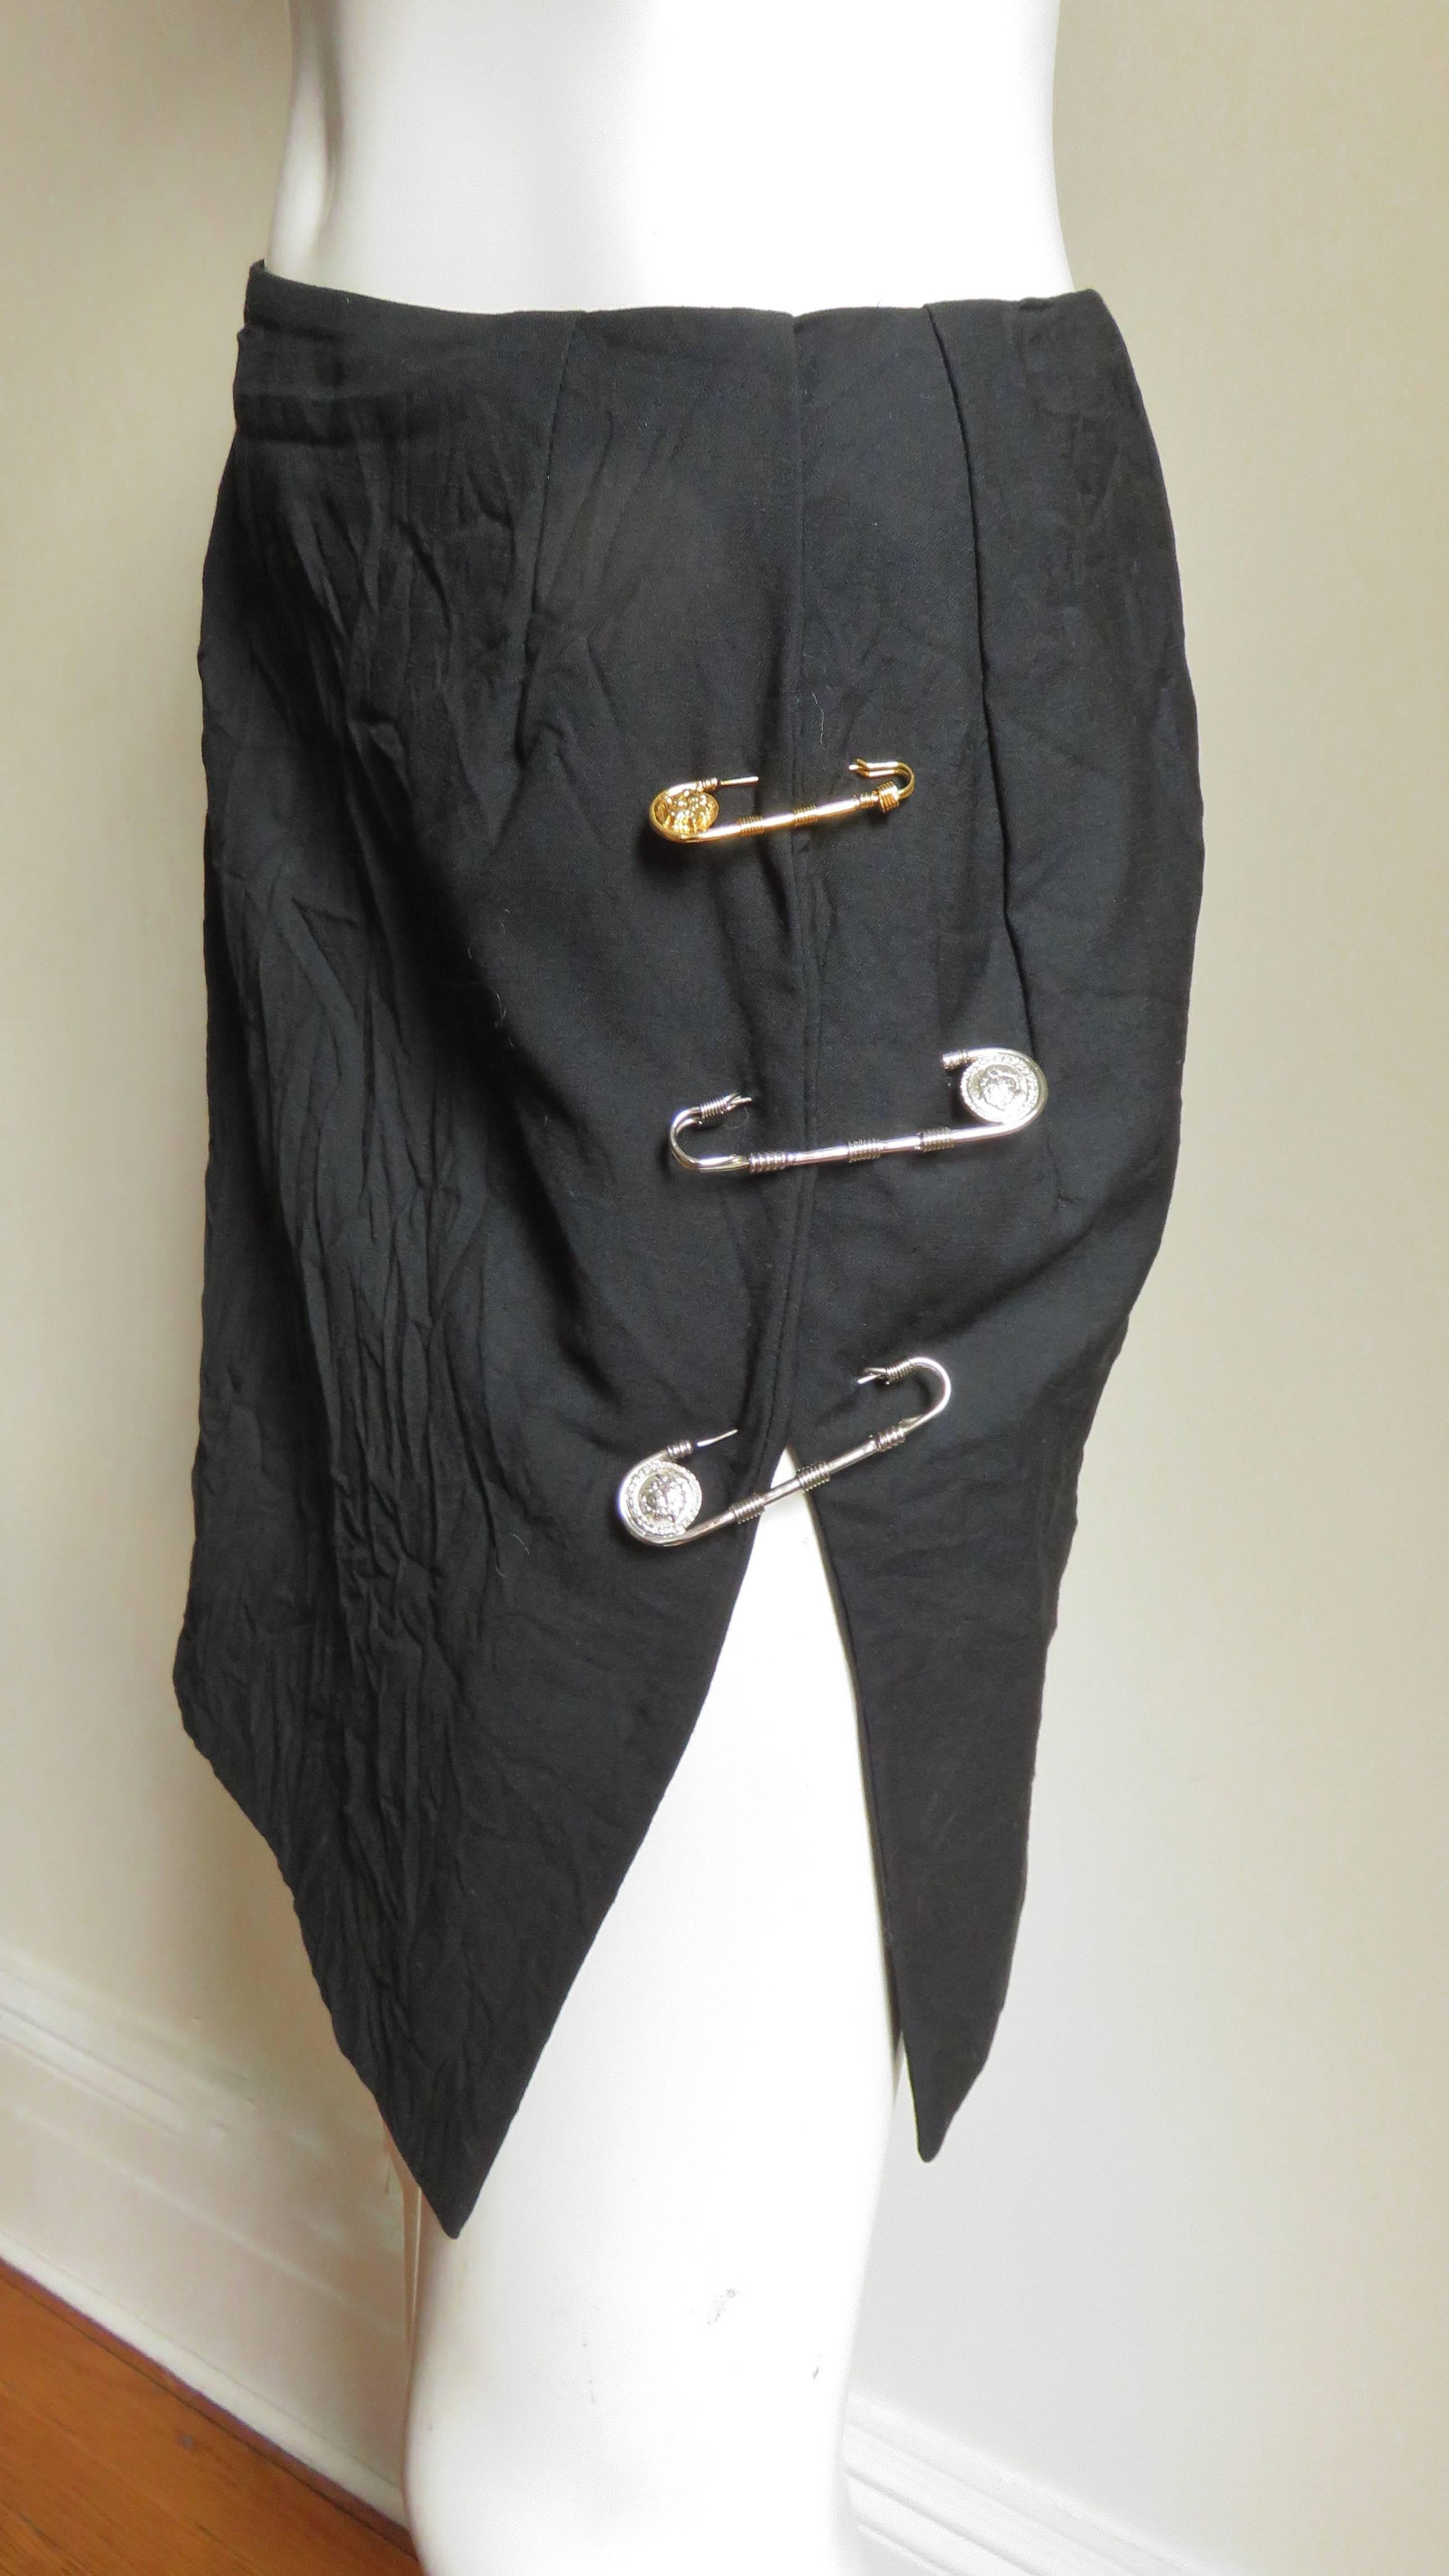 Women's 1990s Iconic Gianni Versace Safety Pin Skirt